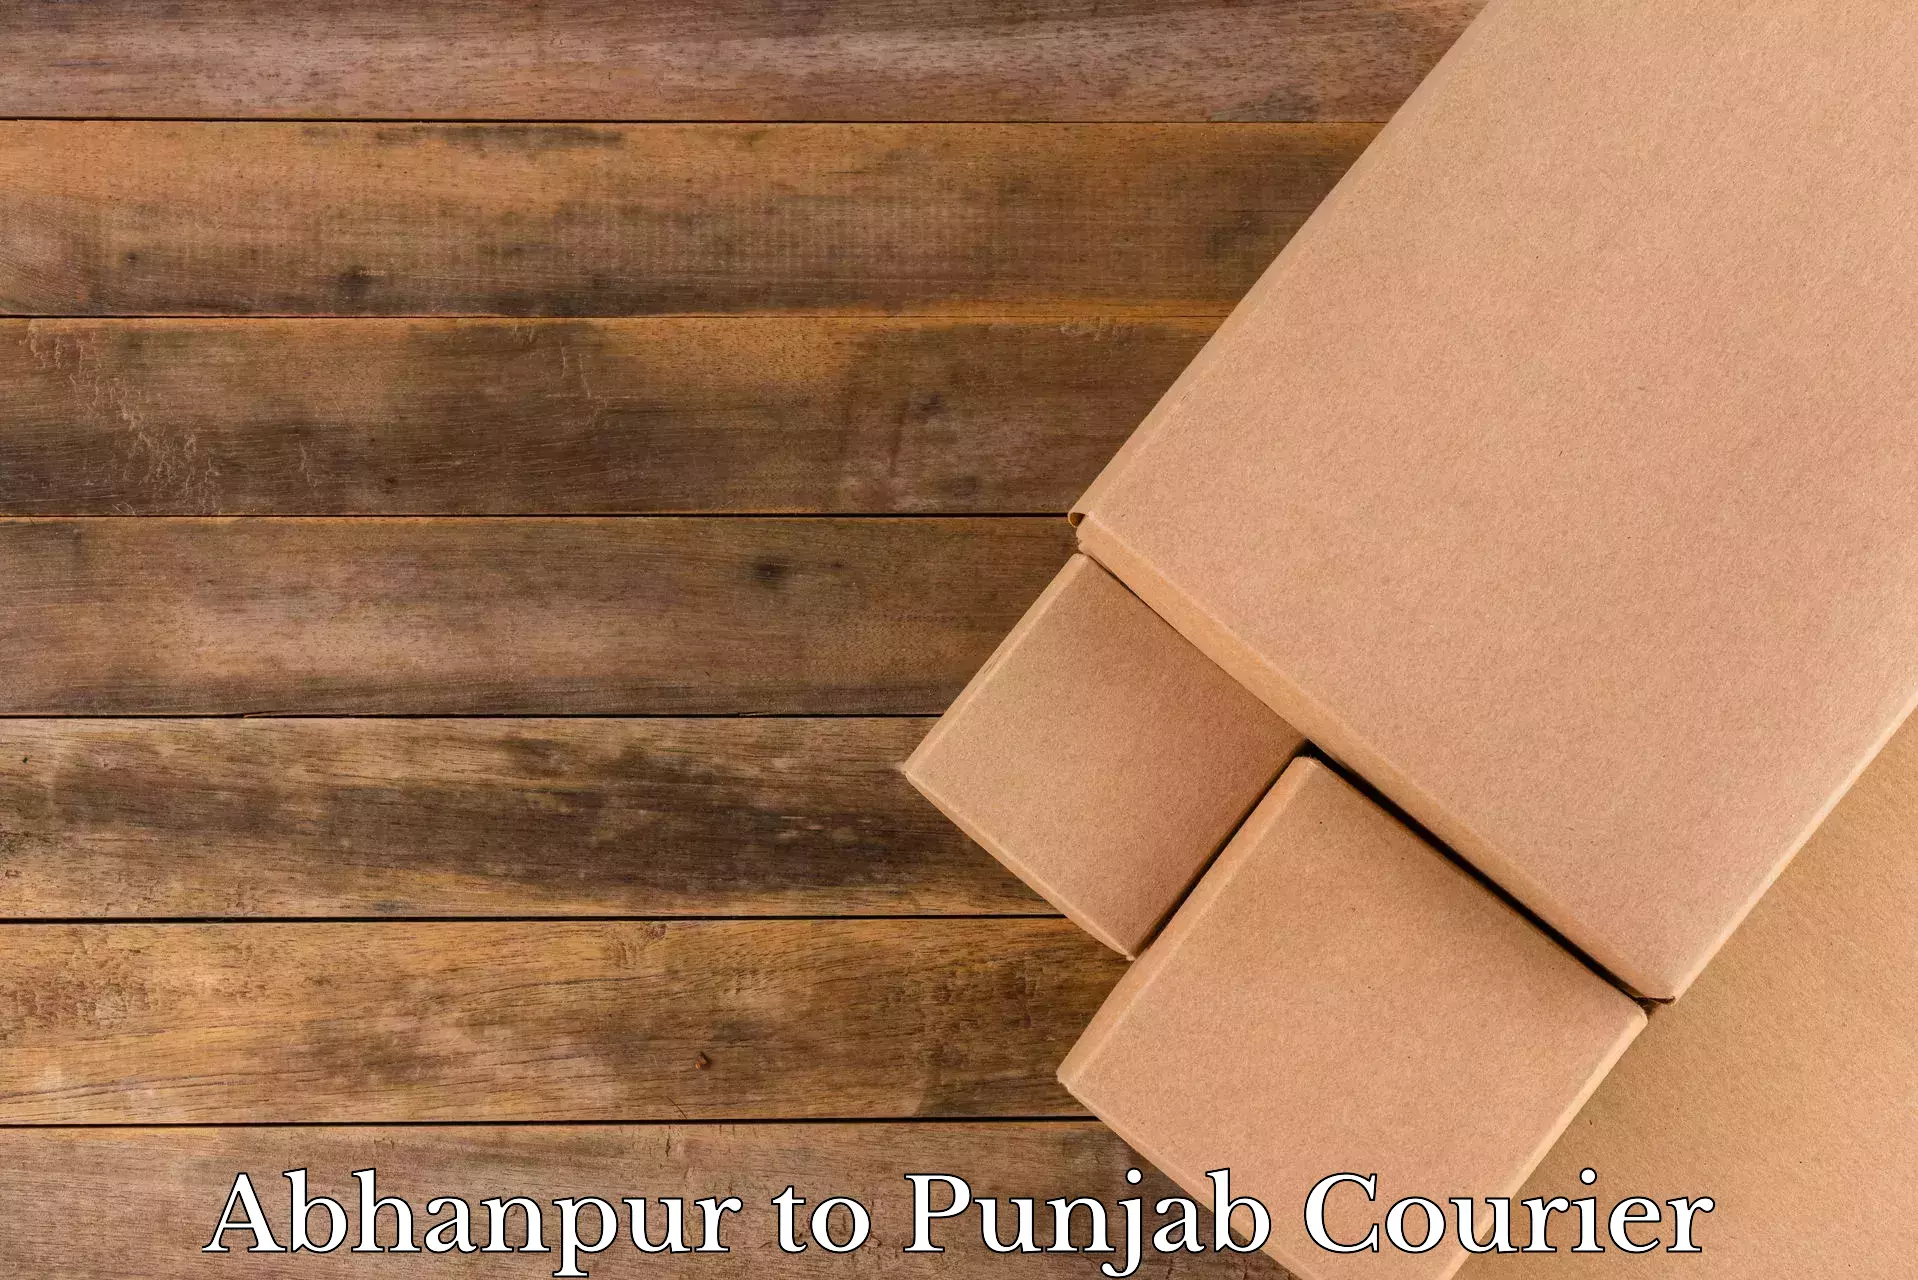 Furniture transport professionals in Abhanpur to Punjab